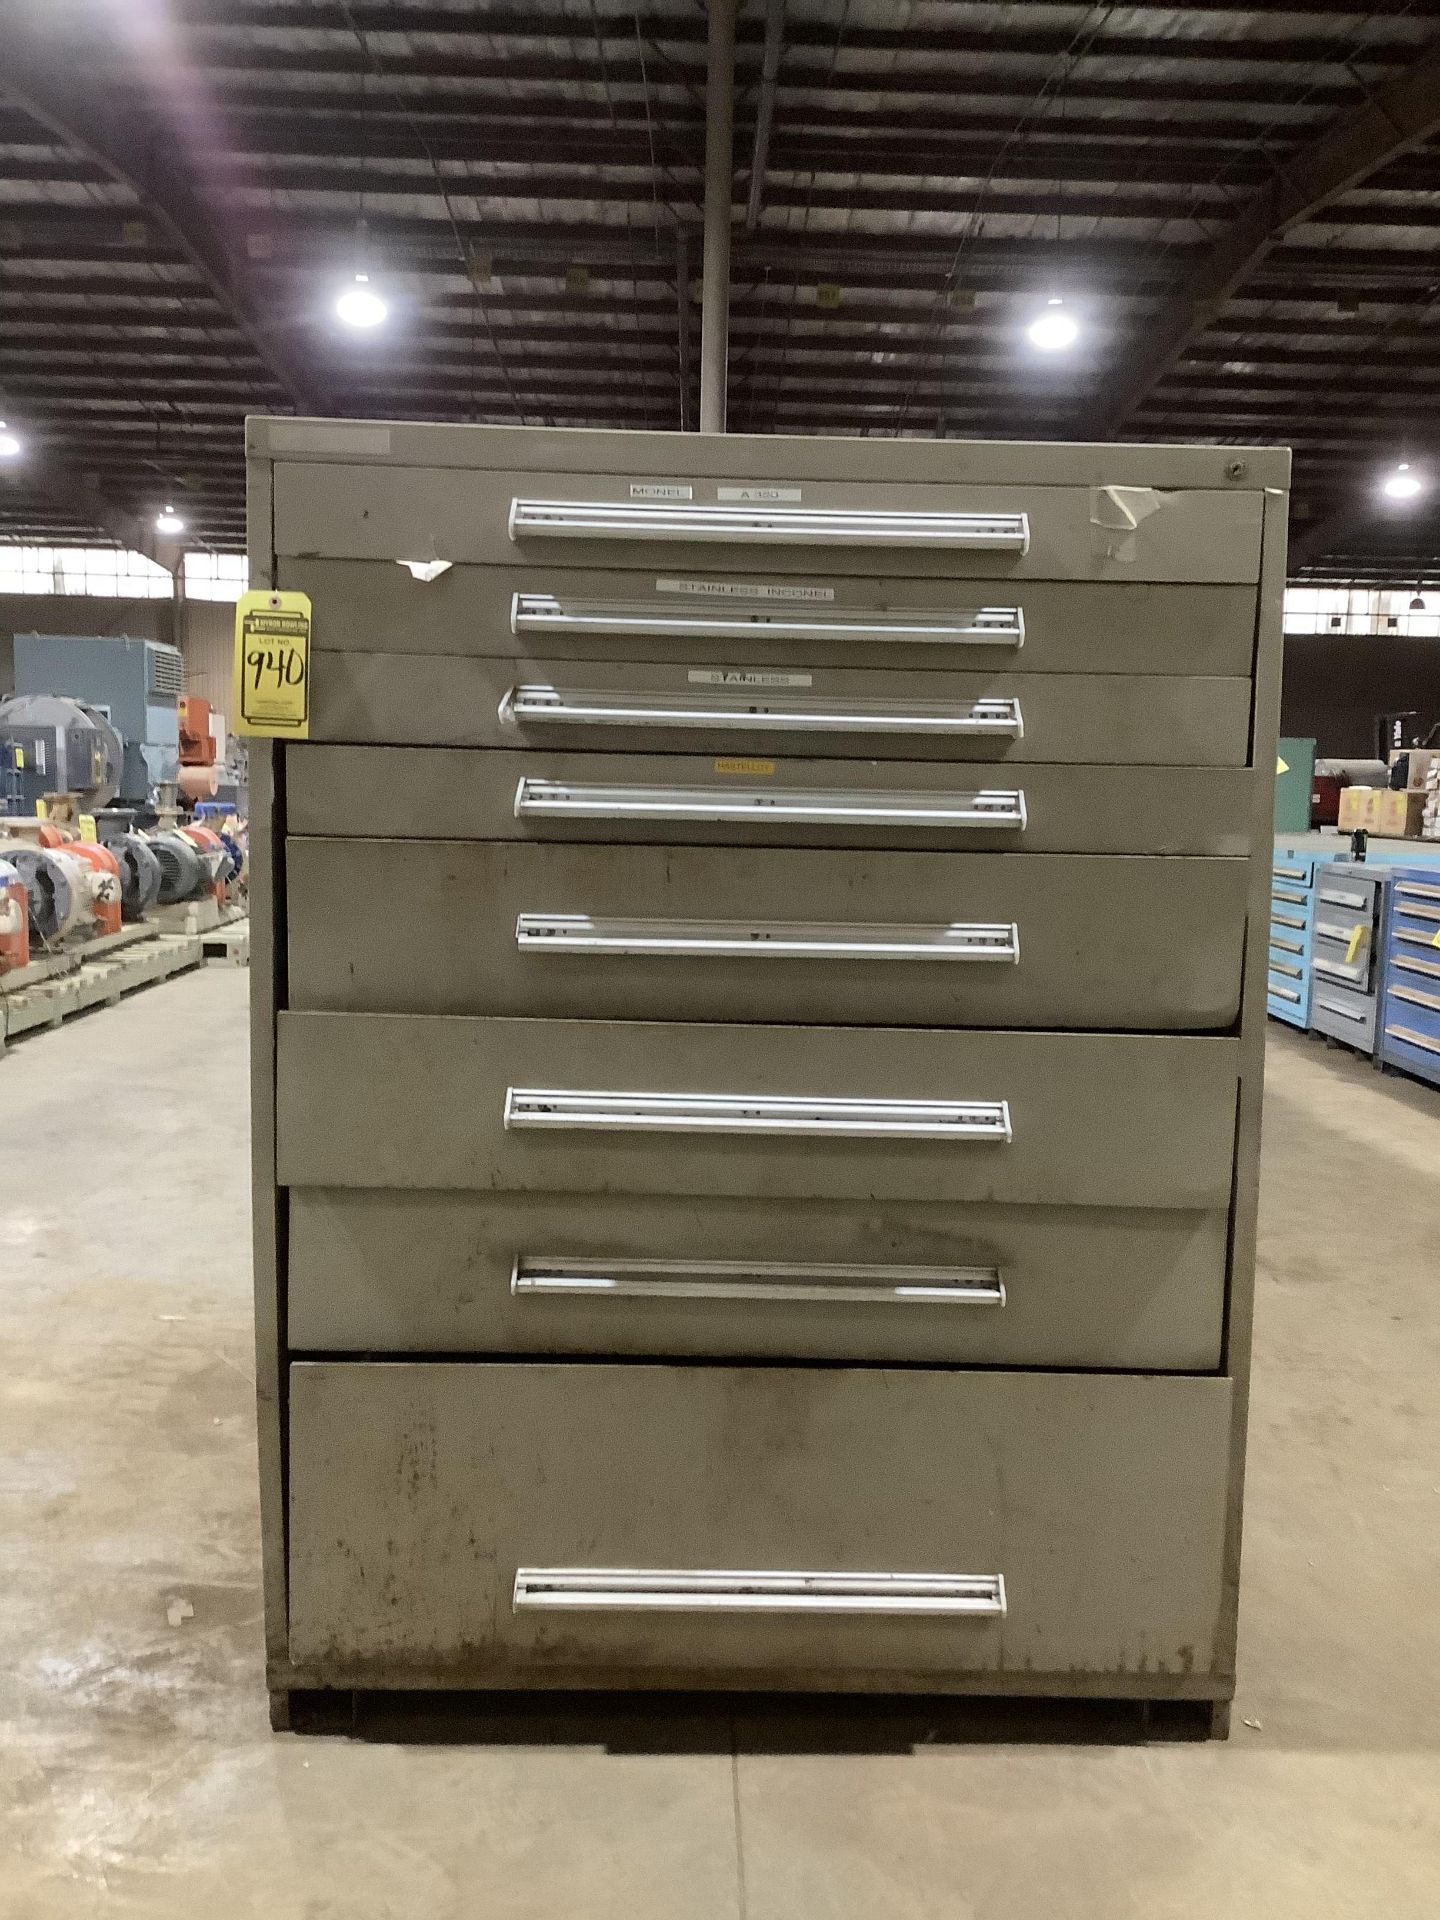 45” WIDE STANLEY VIDMAR 8 DRAWER INDUSTRIAL STORAGE CABINET WITH CONTENTS